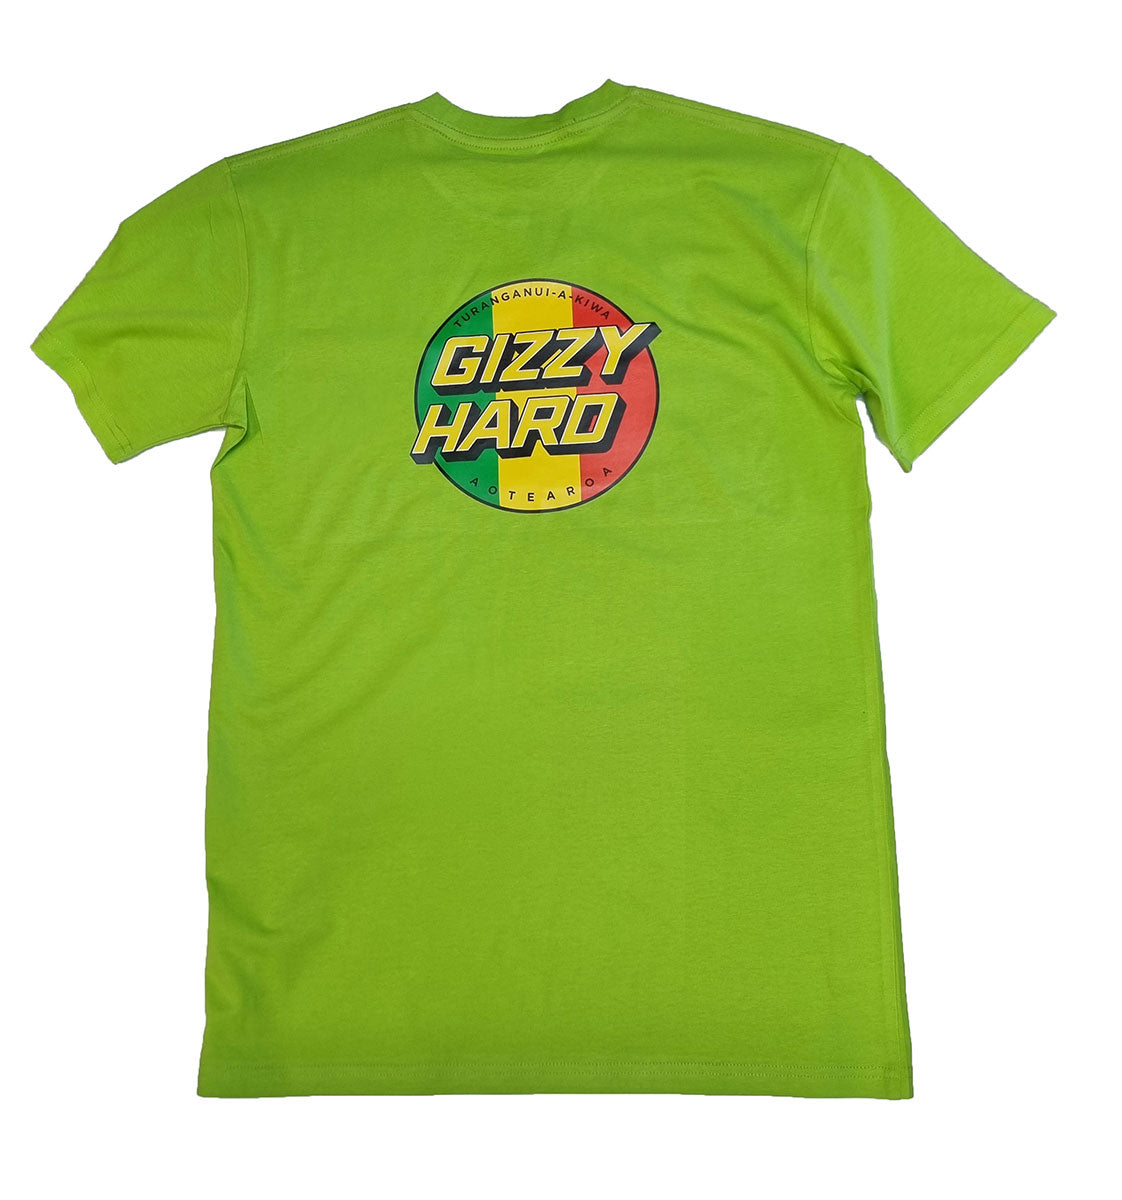 Gizzy Hard Tribute tee in citrus colourway with rasta coloured prints